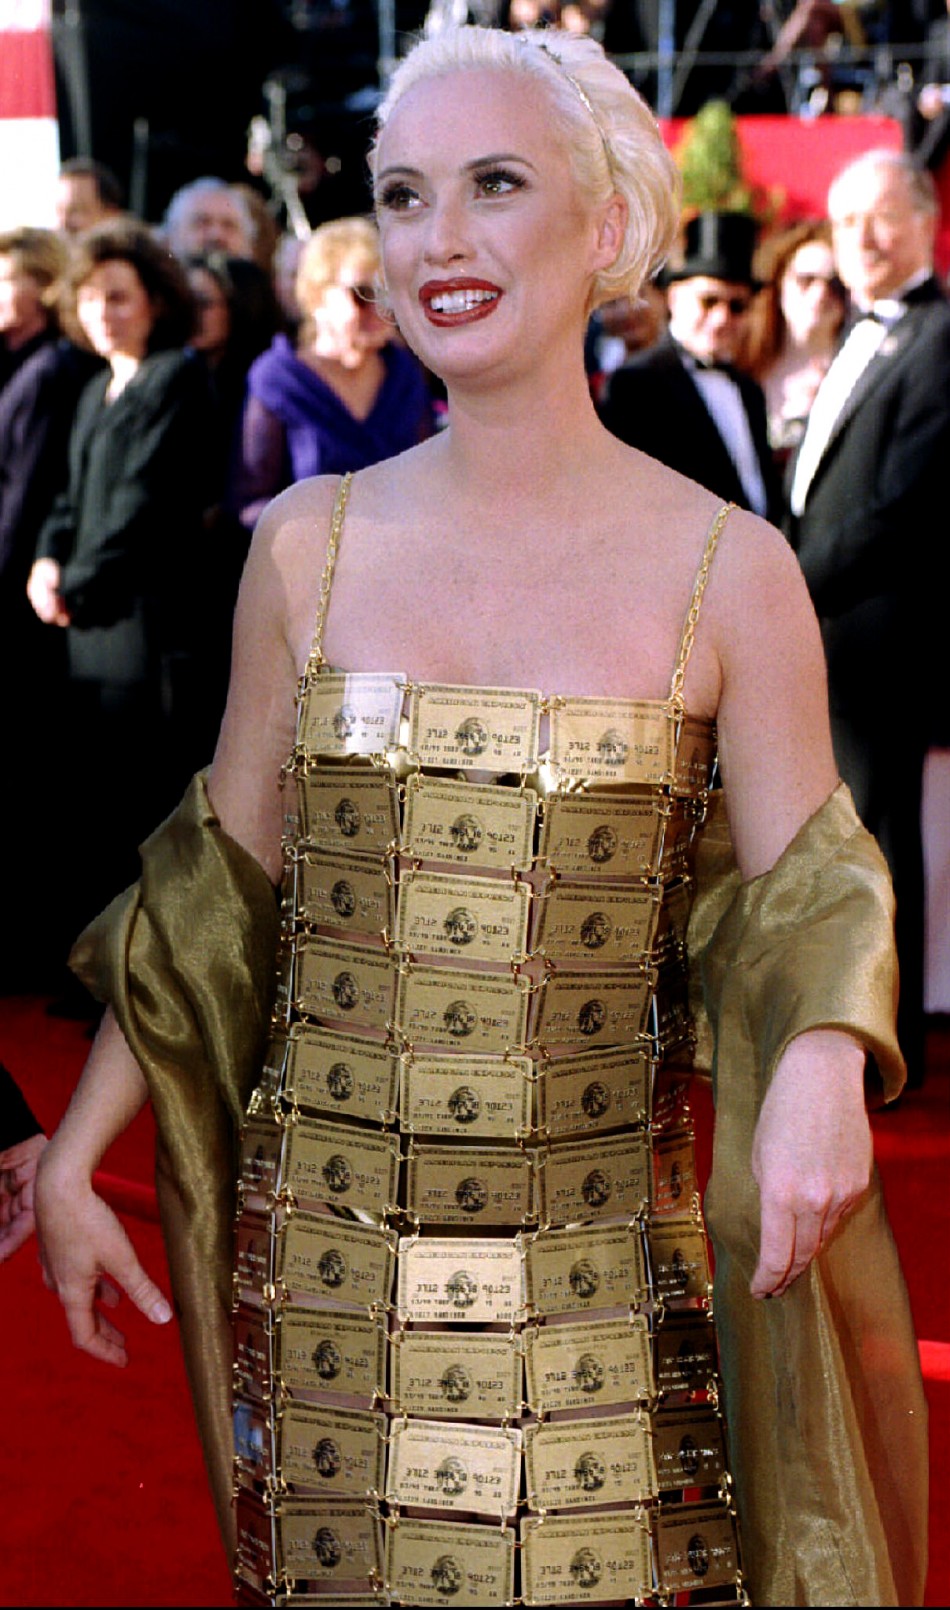 Australian Lizzy Gardiner arrives at the 67th annual Academy Awards March 27 wearing a gown made of American Express credit cards she designed